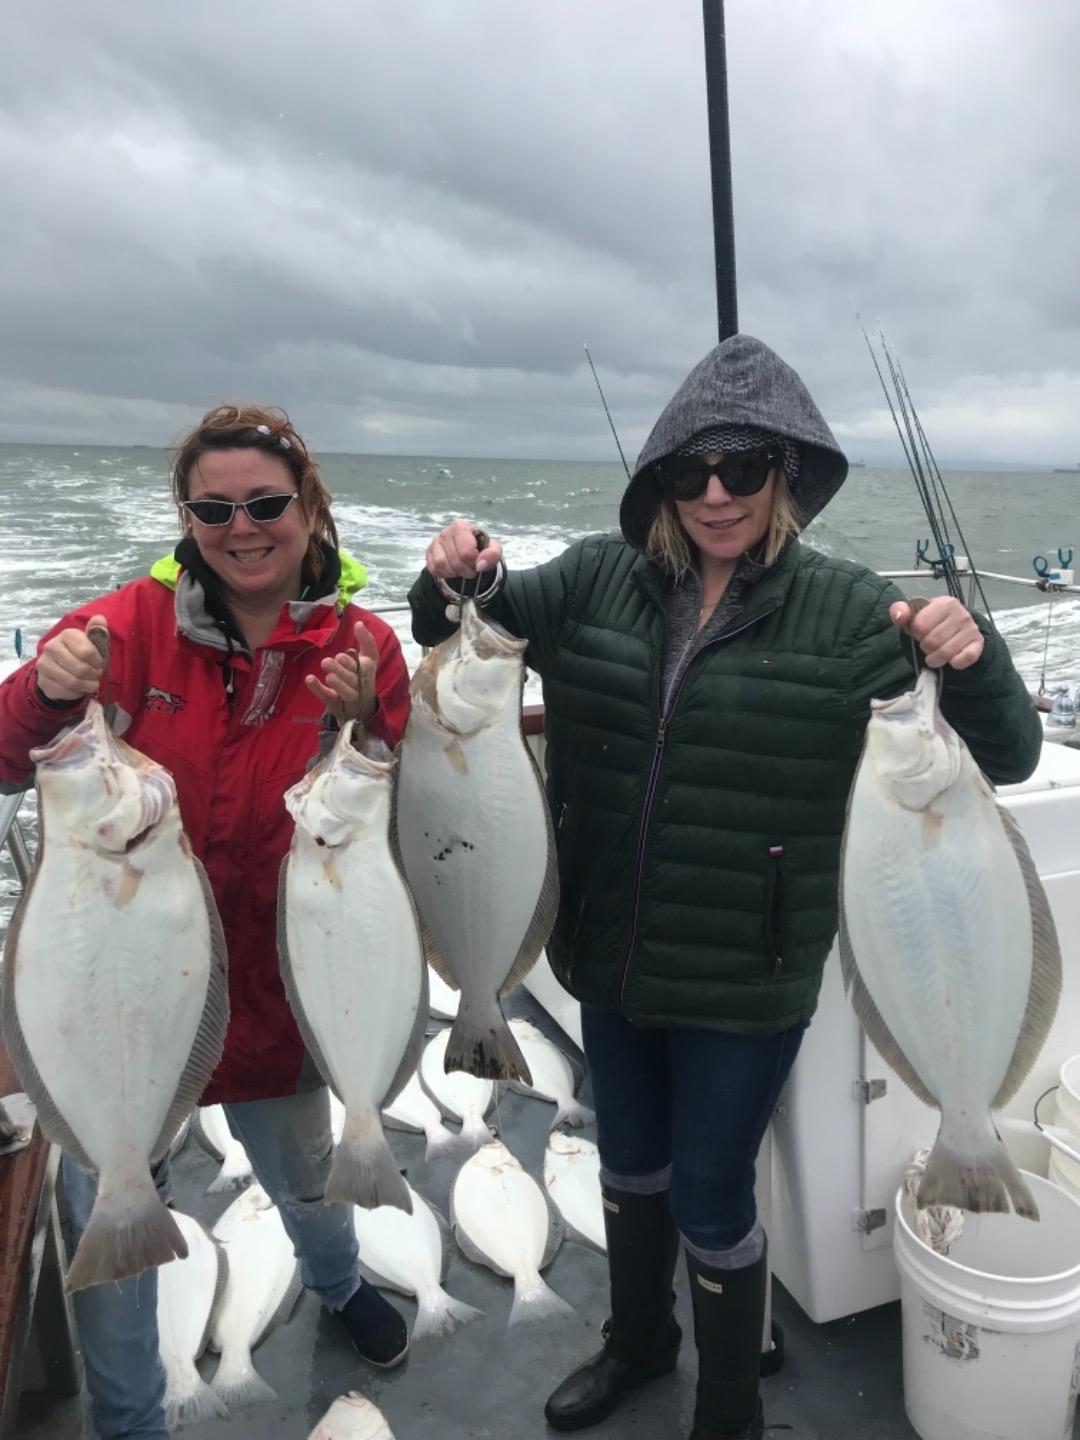 Another great 1/2 day on the bay!!